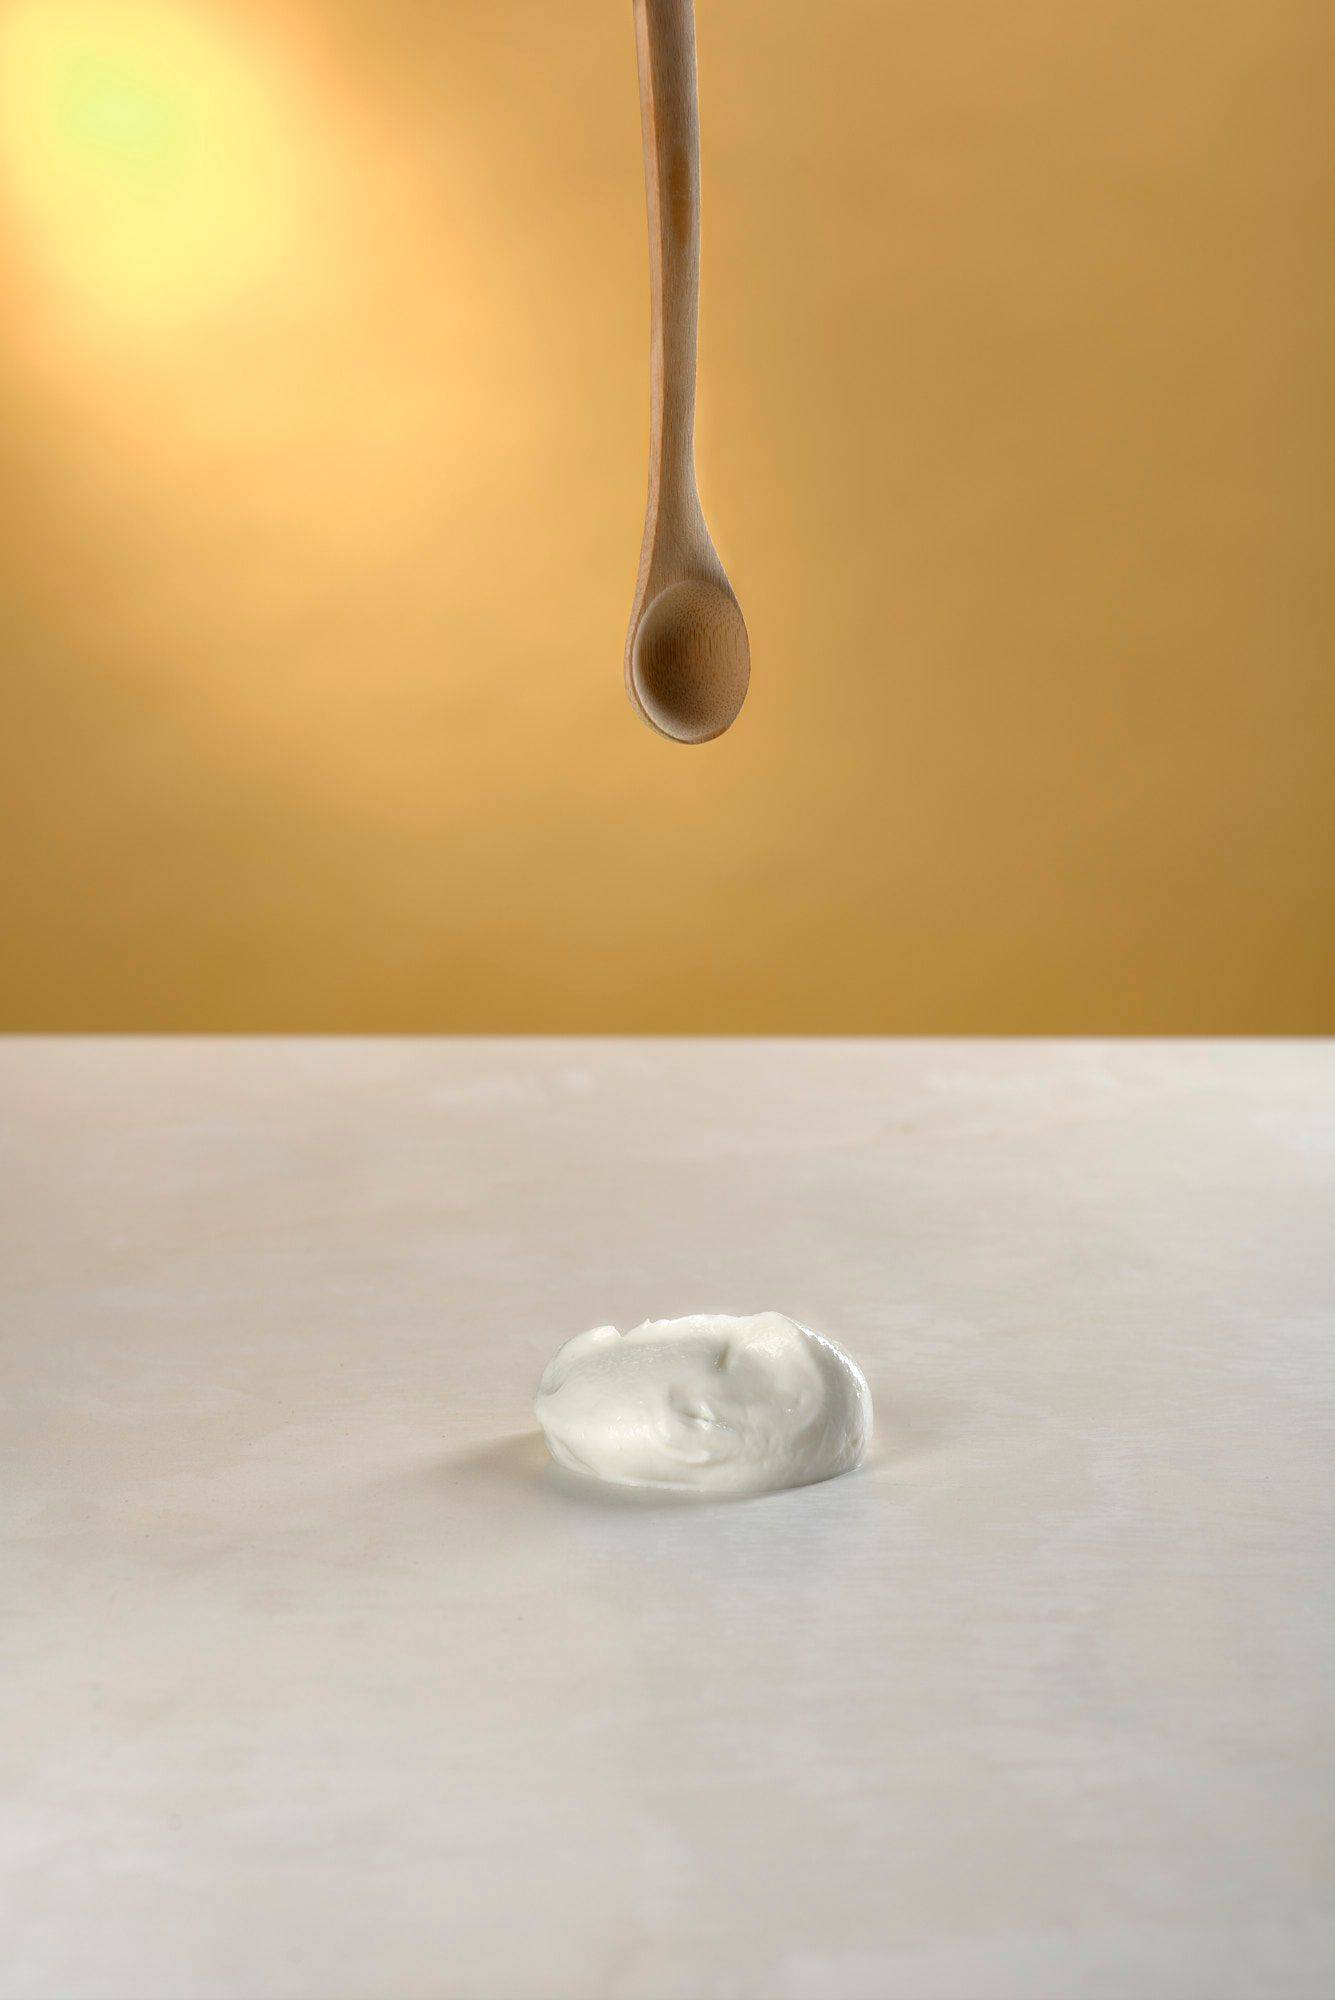 skyr with a wooden spoon on white sapienstone top with yellow background